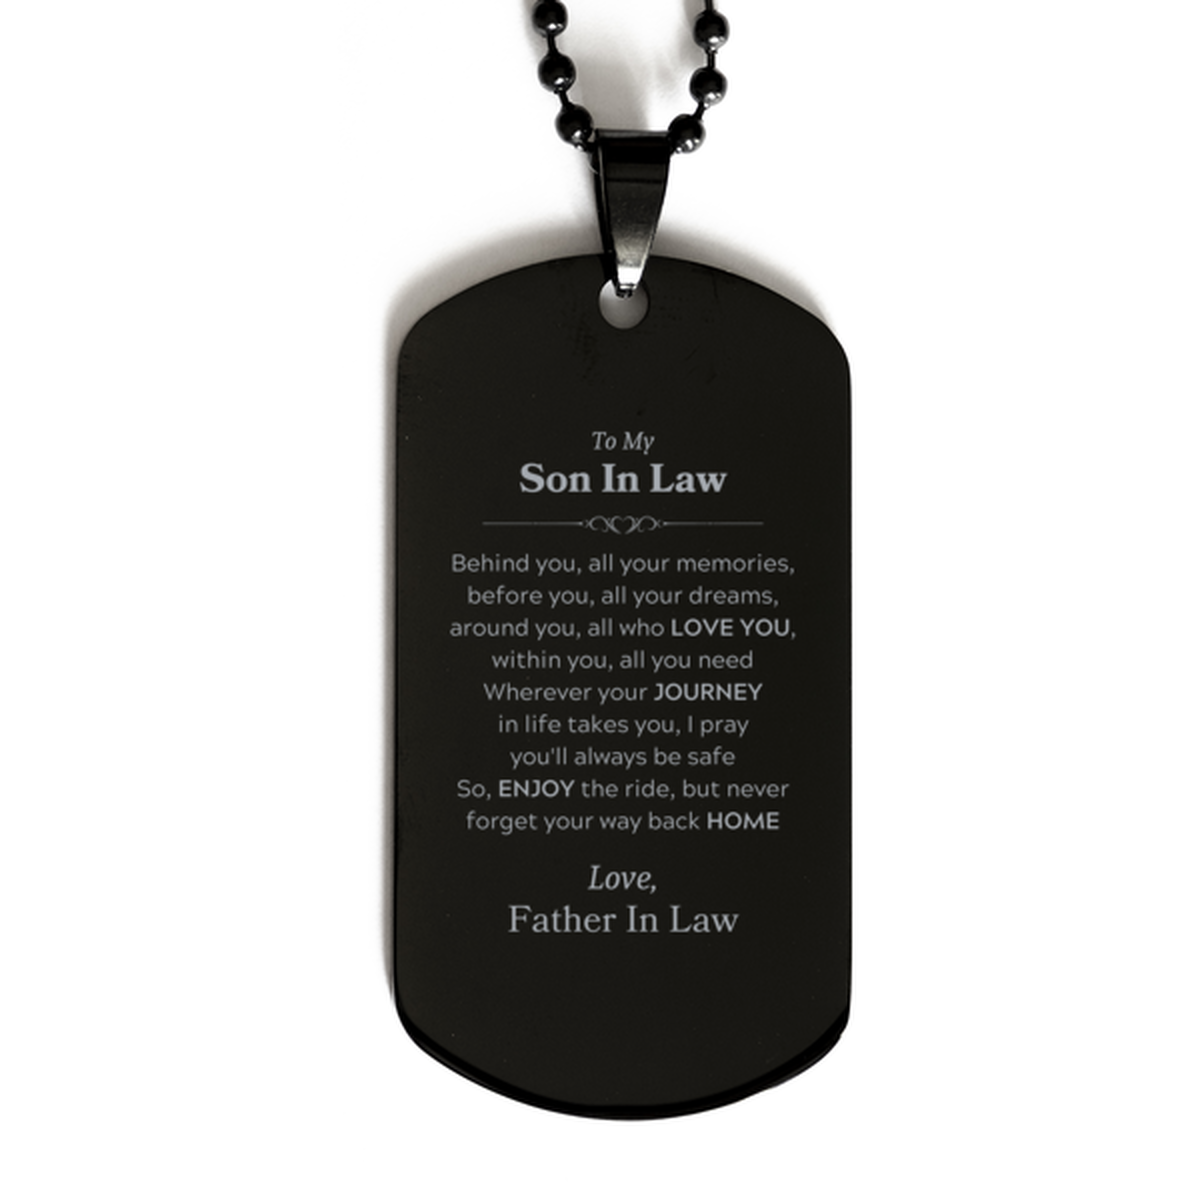 To My Son In Law Graduation Gifts from Father In Law, Son In Law Black Dog Tag Christmas Birthday Gifts for Son In Law Behind you, all your memories, before you, all your dreams. Love, Father In Law